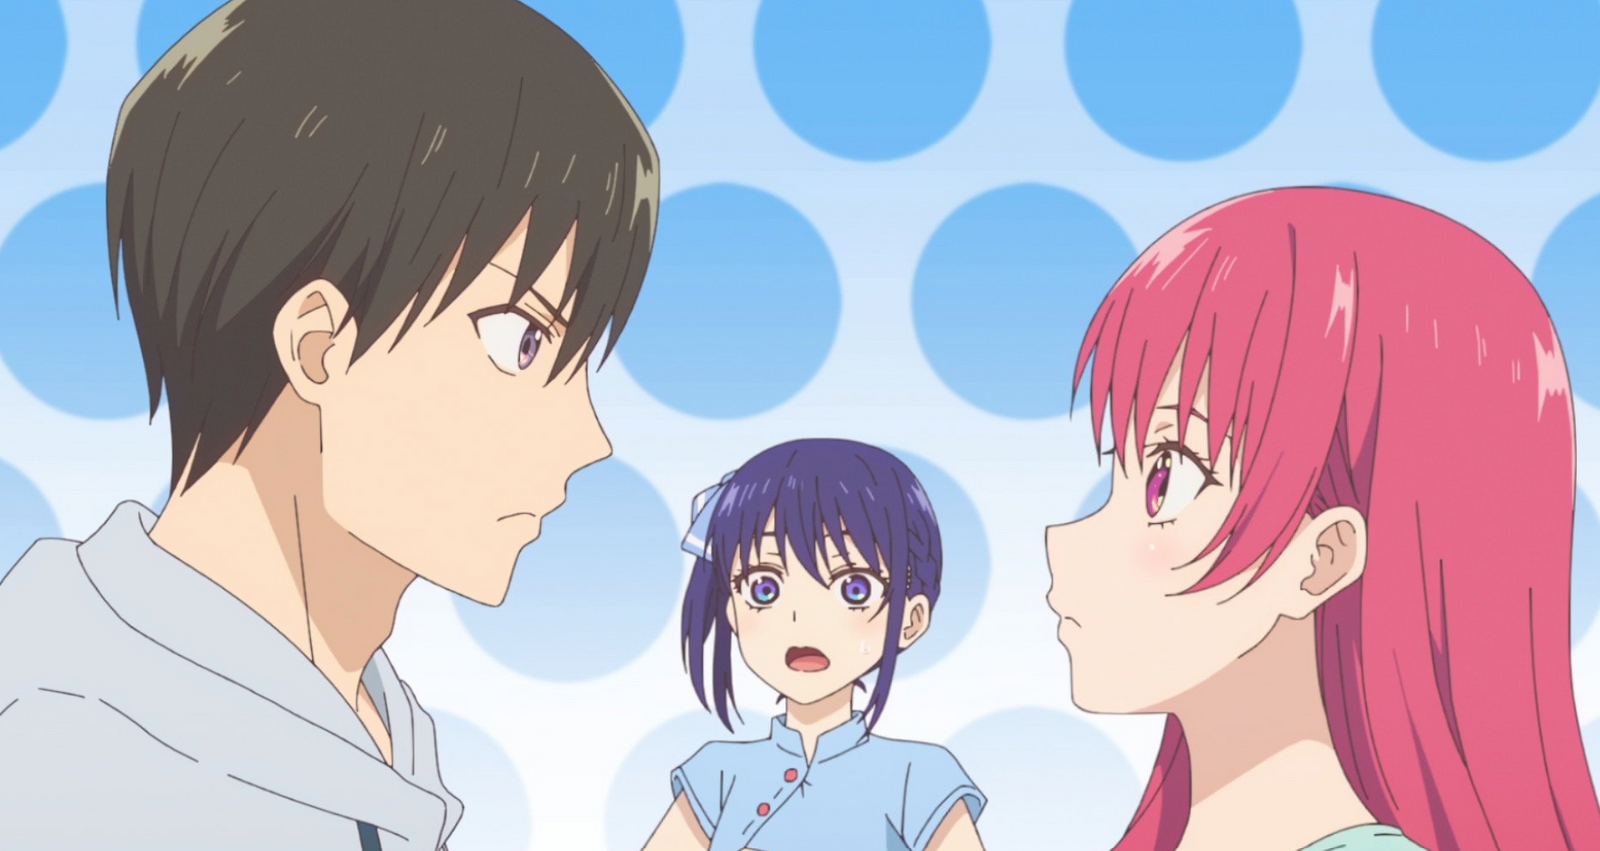 Who Will Naoya Mukai End Up With in the Girlfriend, Girlfriend Anime?